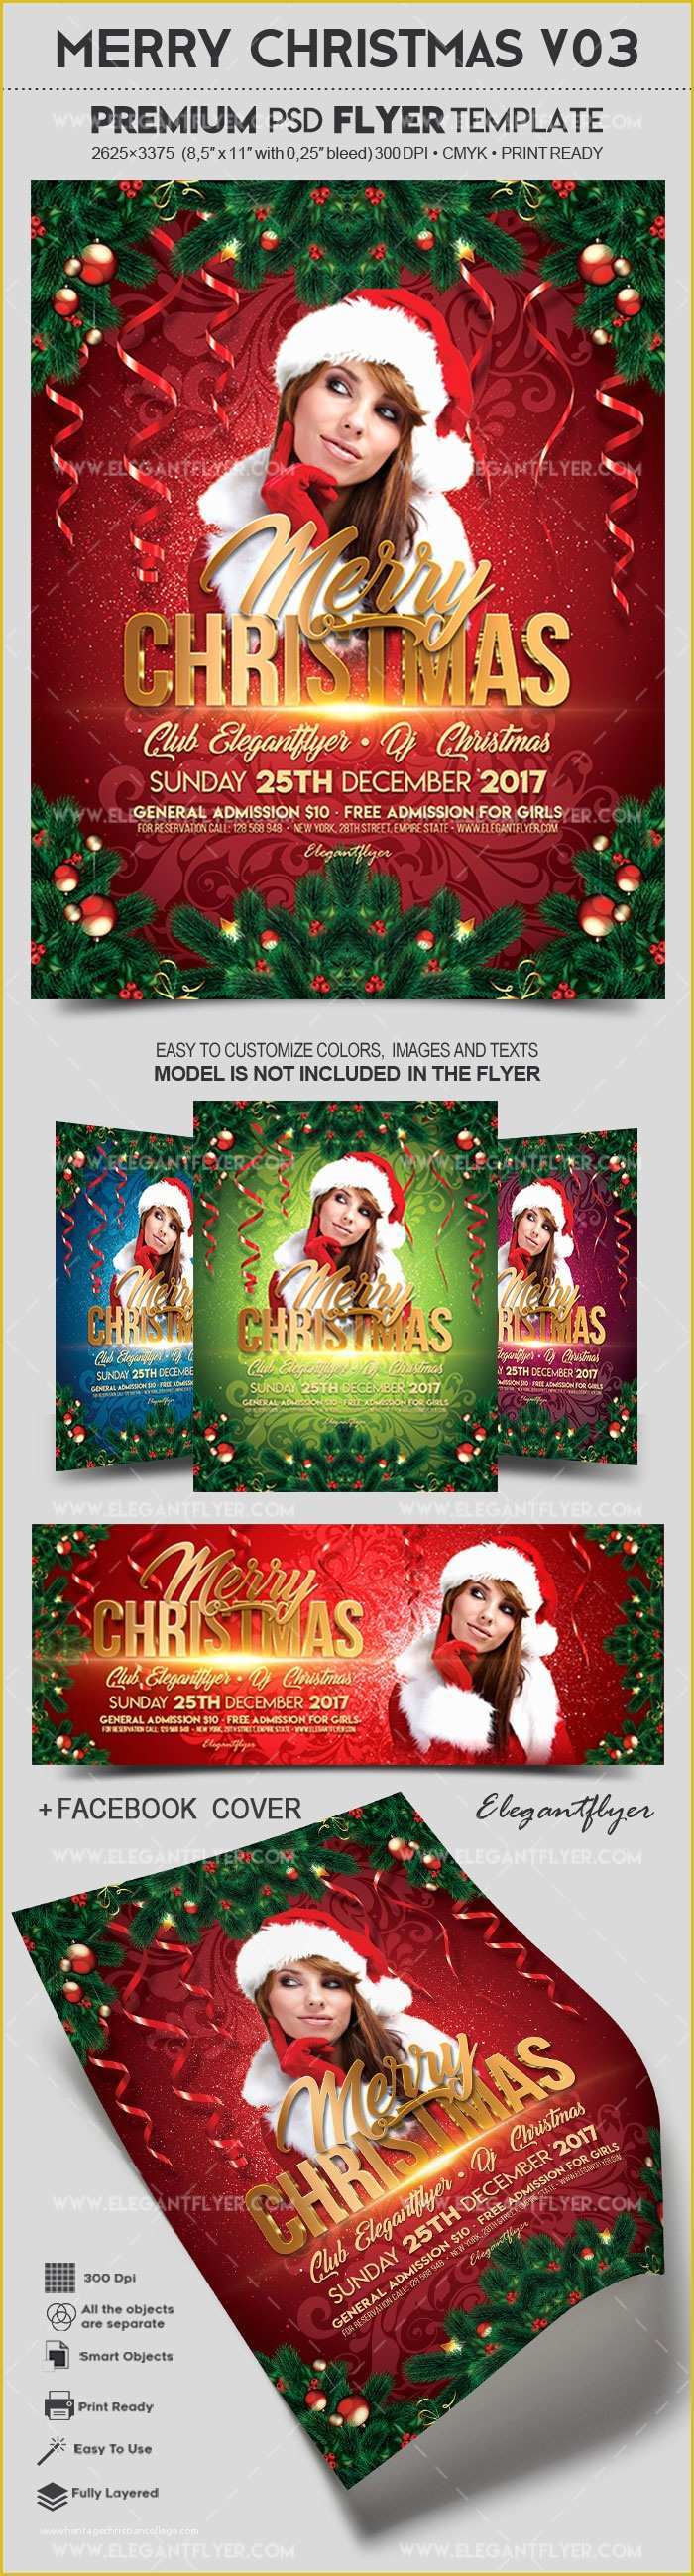 Christmas Flyers Templates Free Psd Of Merry Christmas V03 – Flyer Psd Template – by Elegantflyer